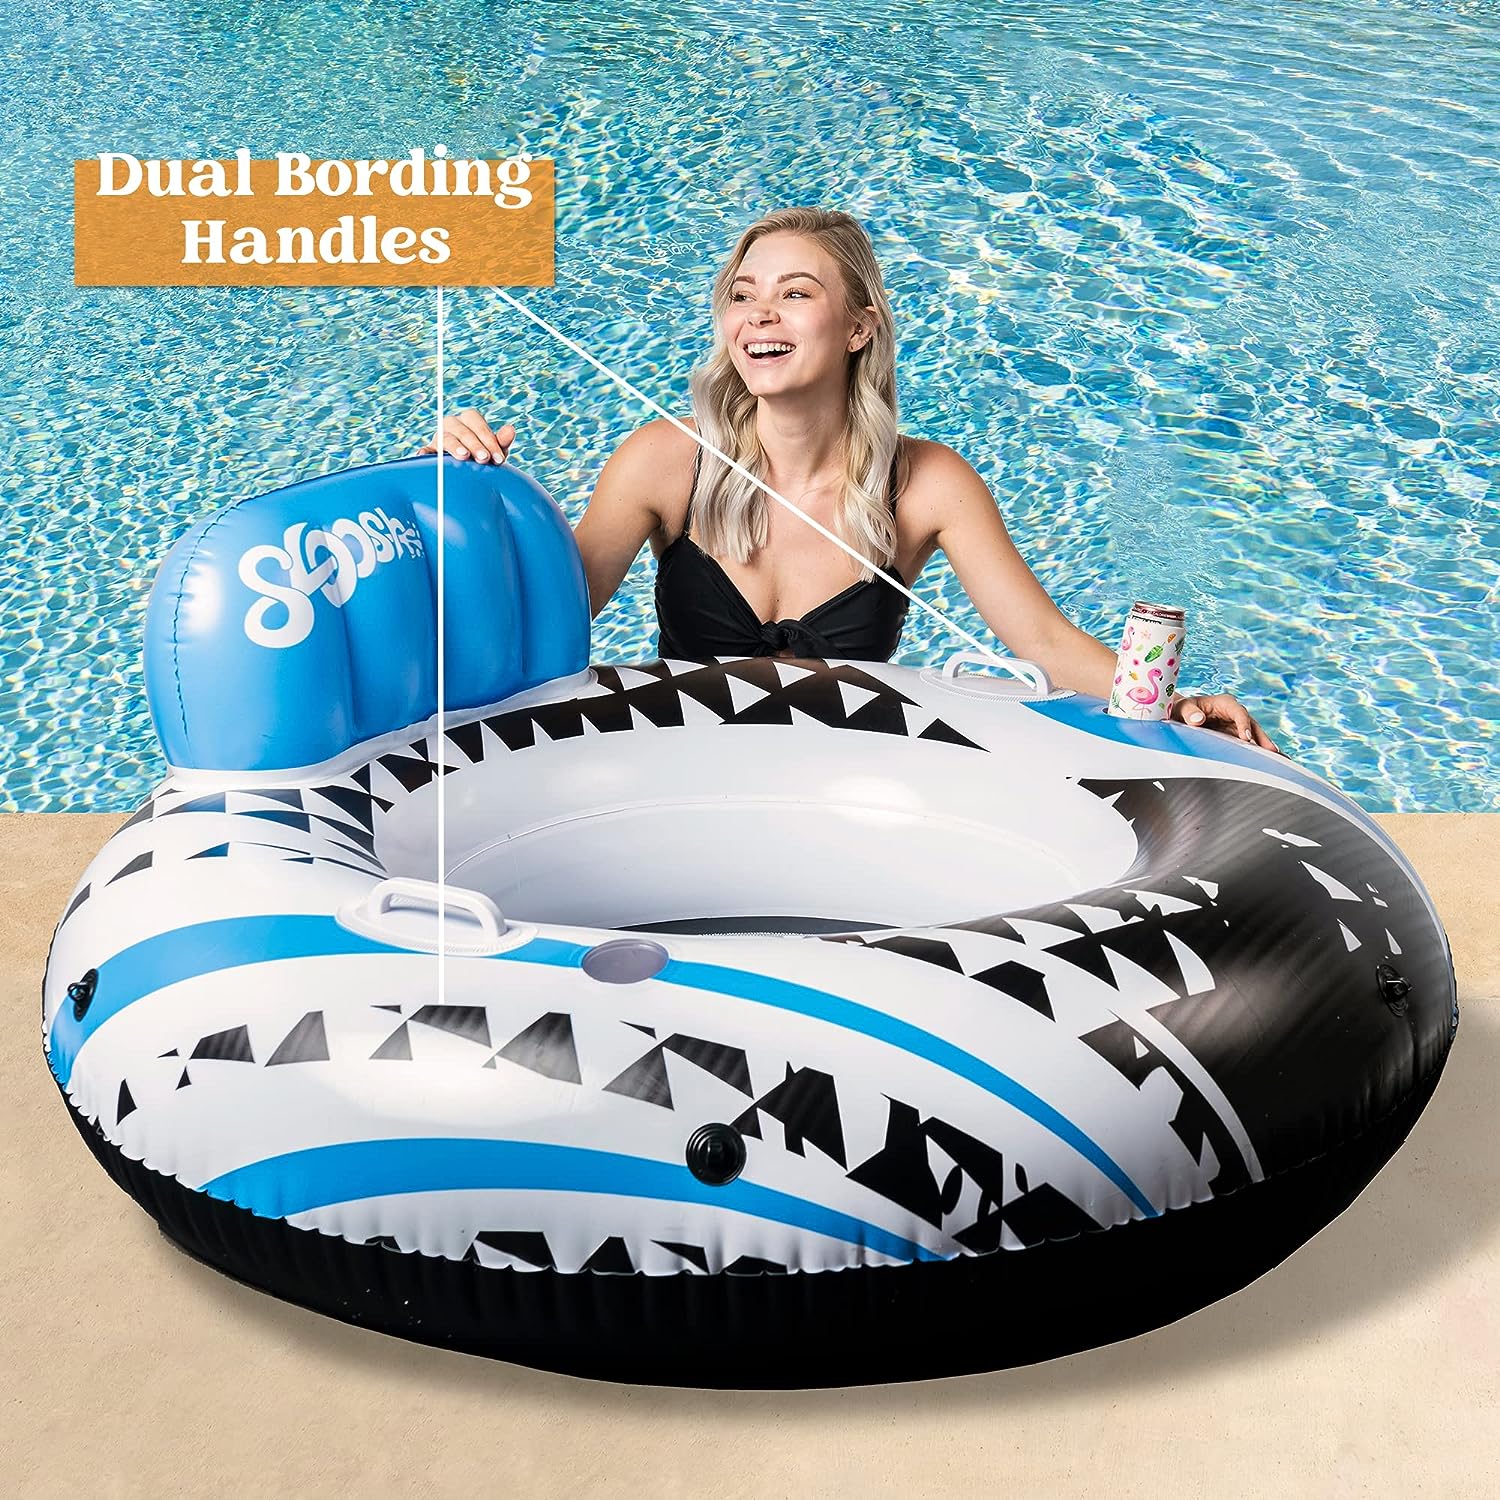 Sloosh Inflatable Lake Tube Float review